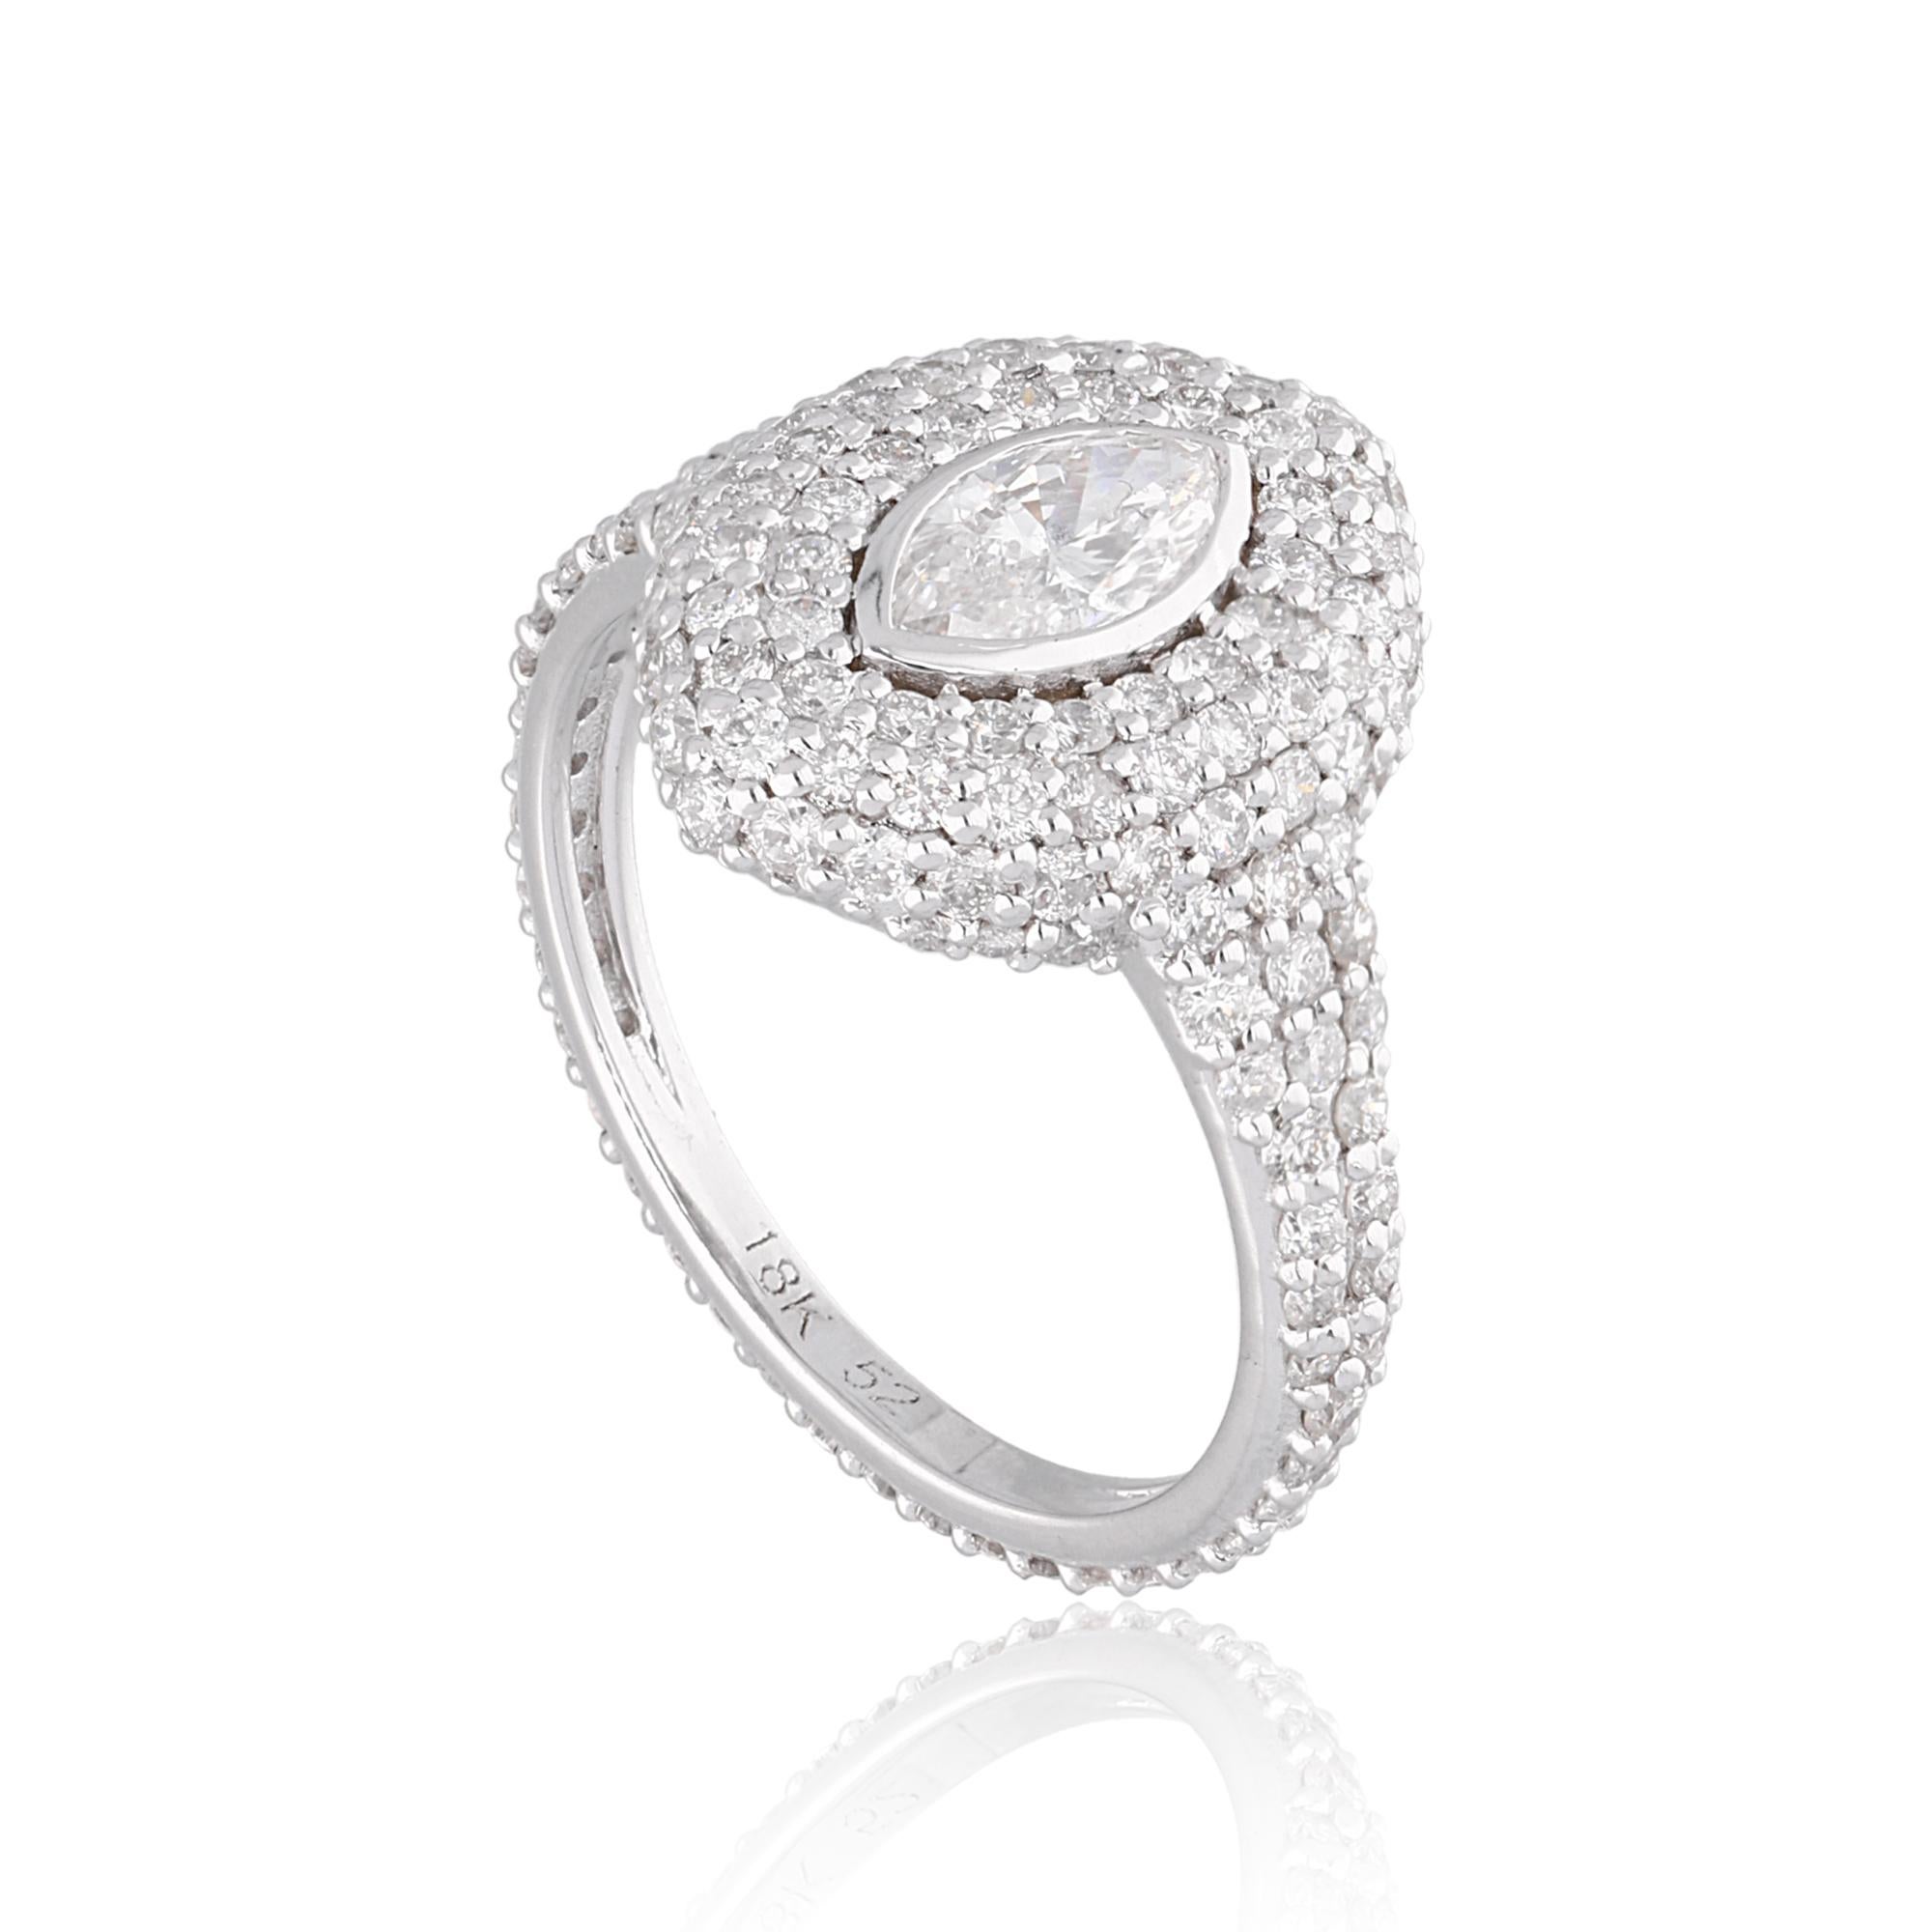 Modern 1.73 Carat SI Clarity HI Color Marquise Round Diamond Ring 14 Karat White Gold For Sale